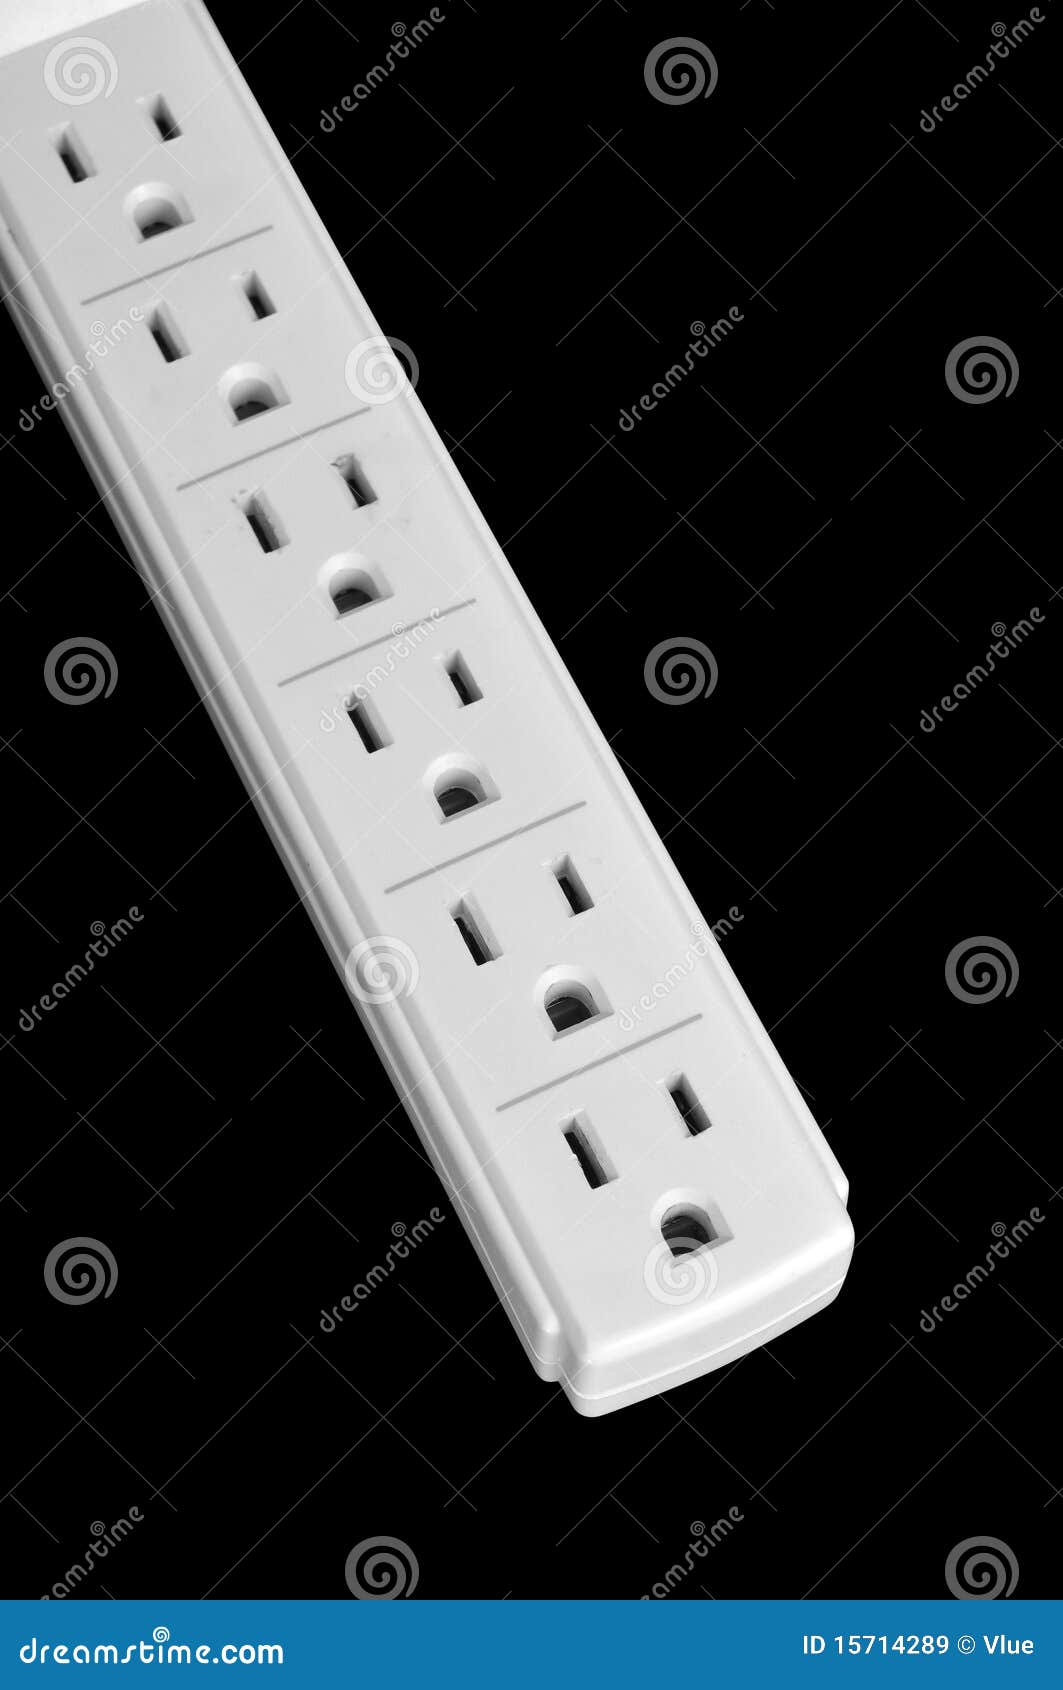 surge protector electric outlet